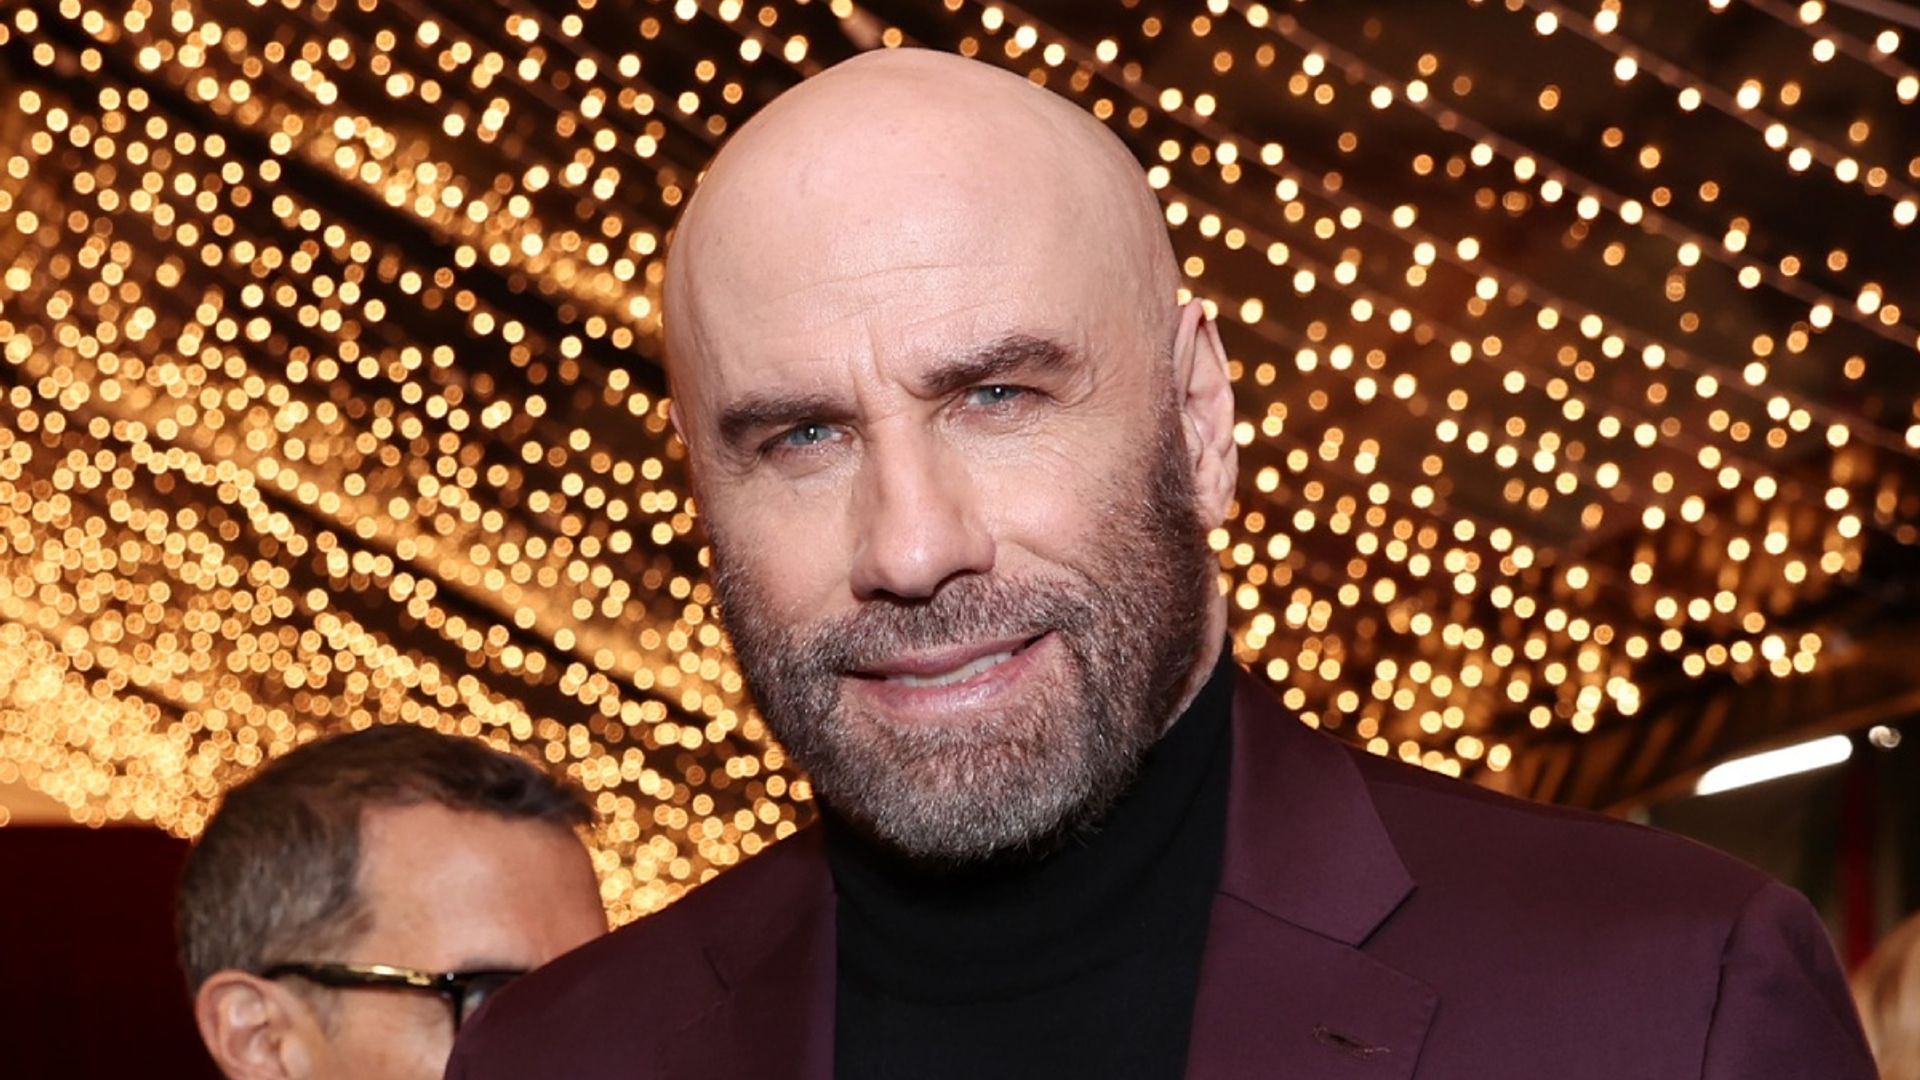 John Travolta leaves fans gushing with new heartwarming family video